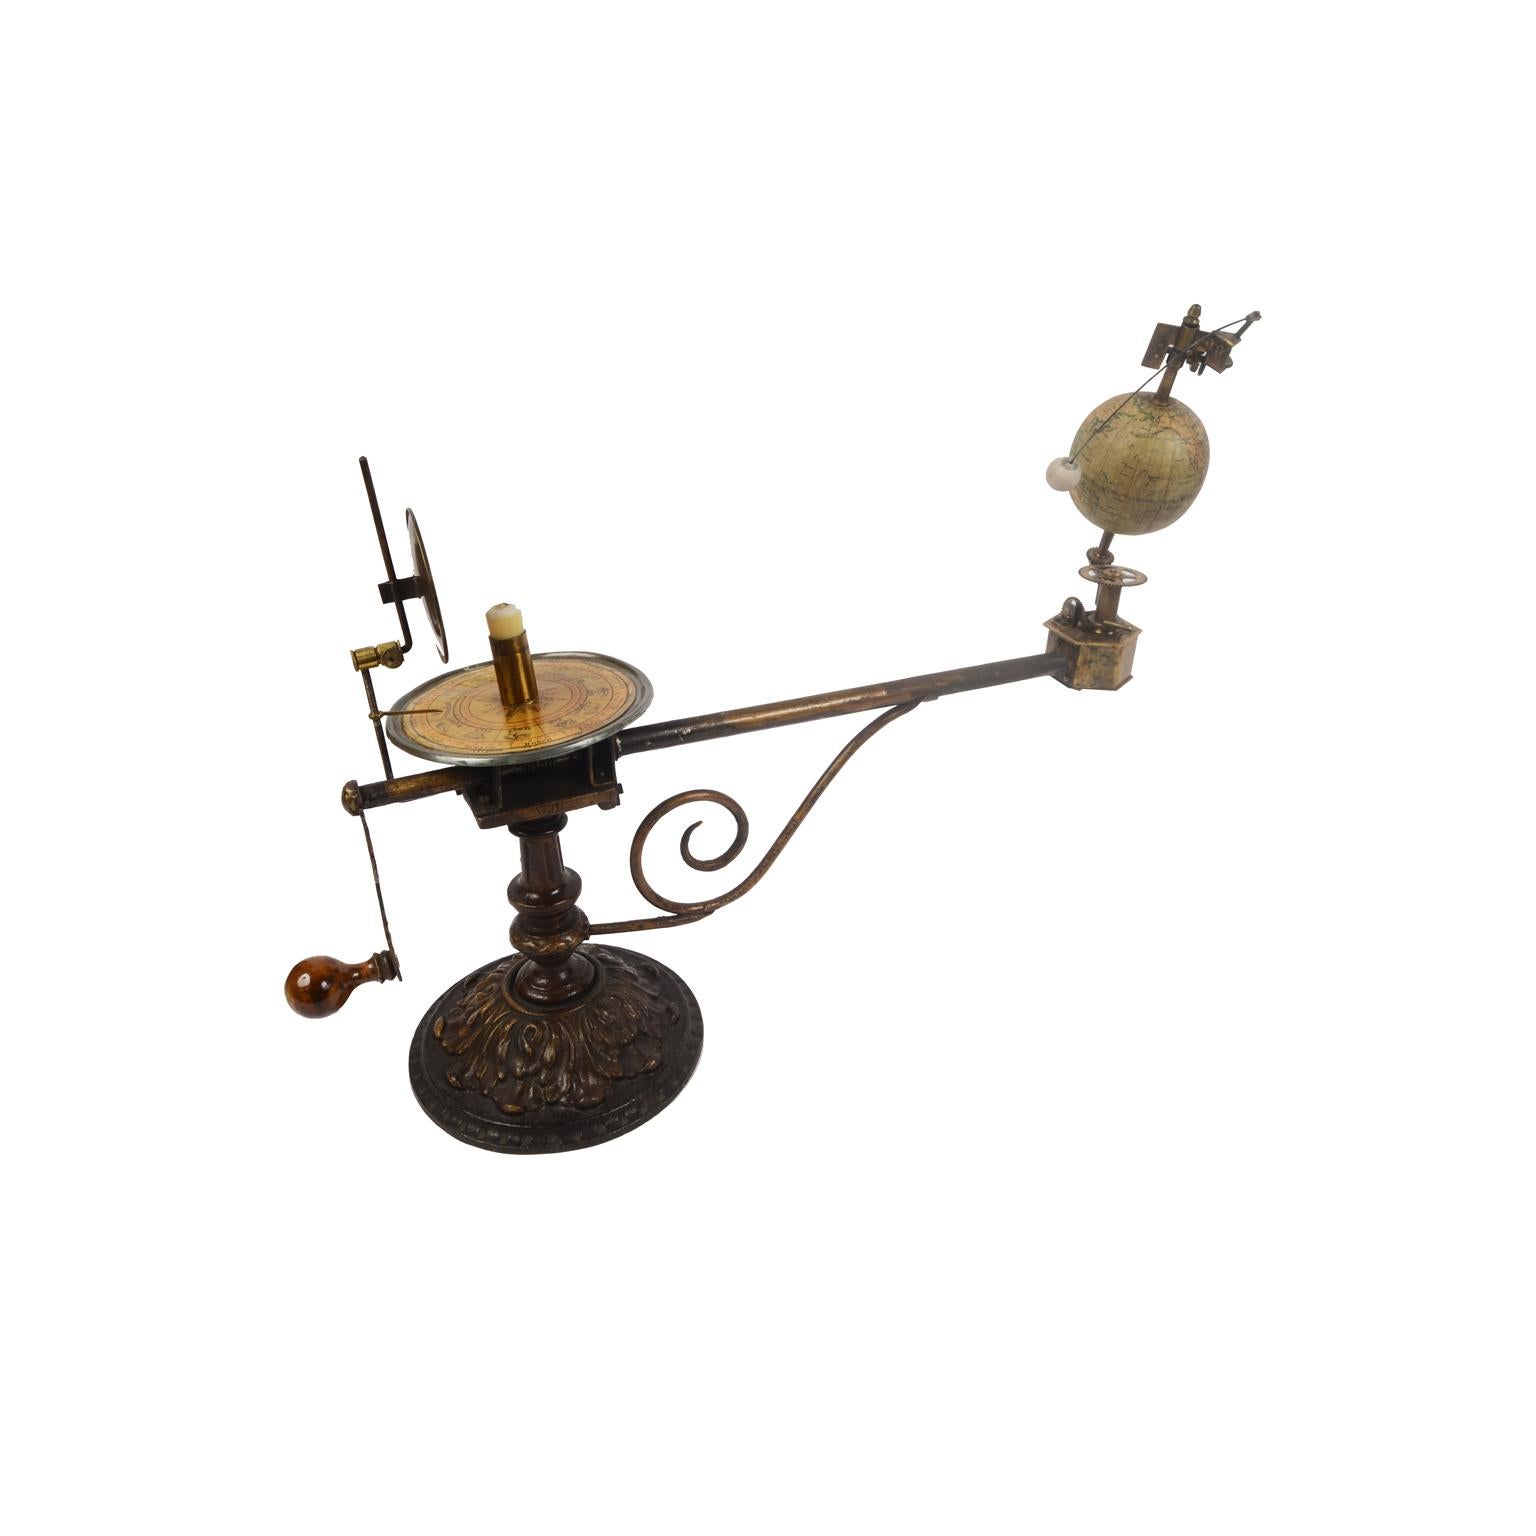 Rare orrery, or mechanical model depicting the solar system, from the second half of the 19th century. On the cartouche of the globe we read: Globus Jan Felkla Syn Roztoky Prahy. Bronze patinated cast iron structure, brass gears and terrestrial